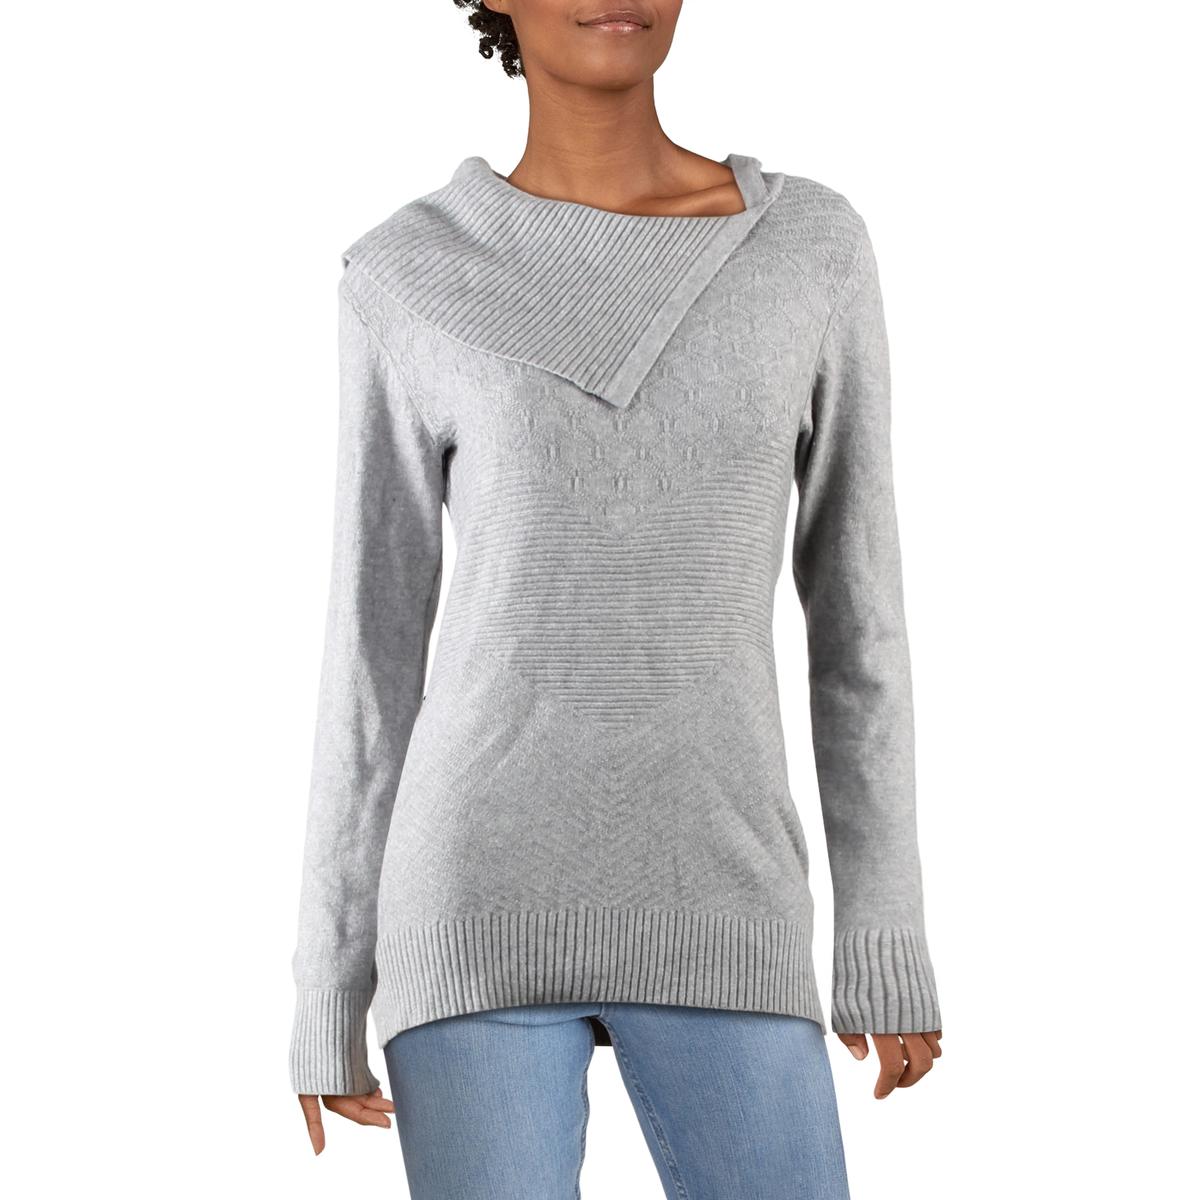 Motive Womens Knit Ribbed Trim Envelope Neck Pullover Sweater Top BHFO ...